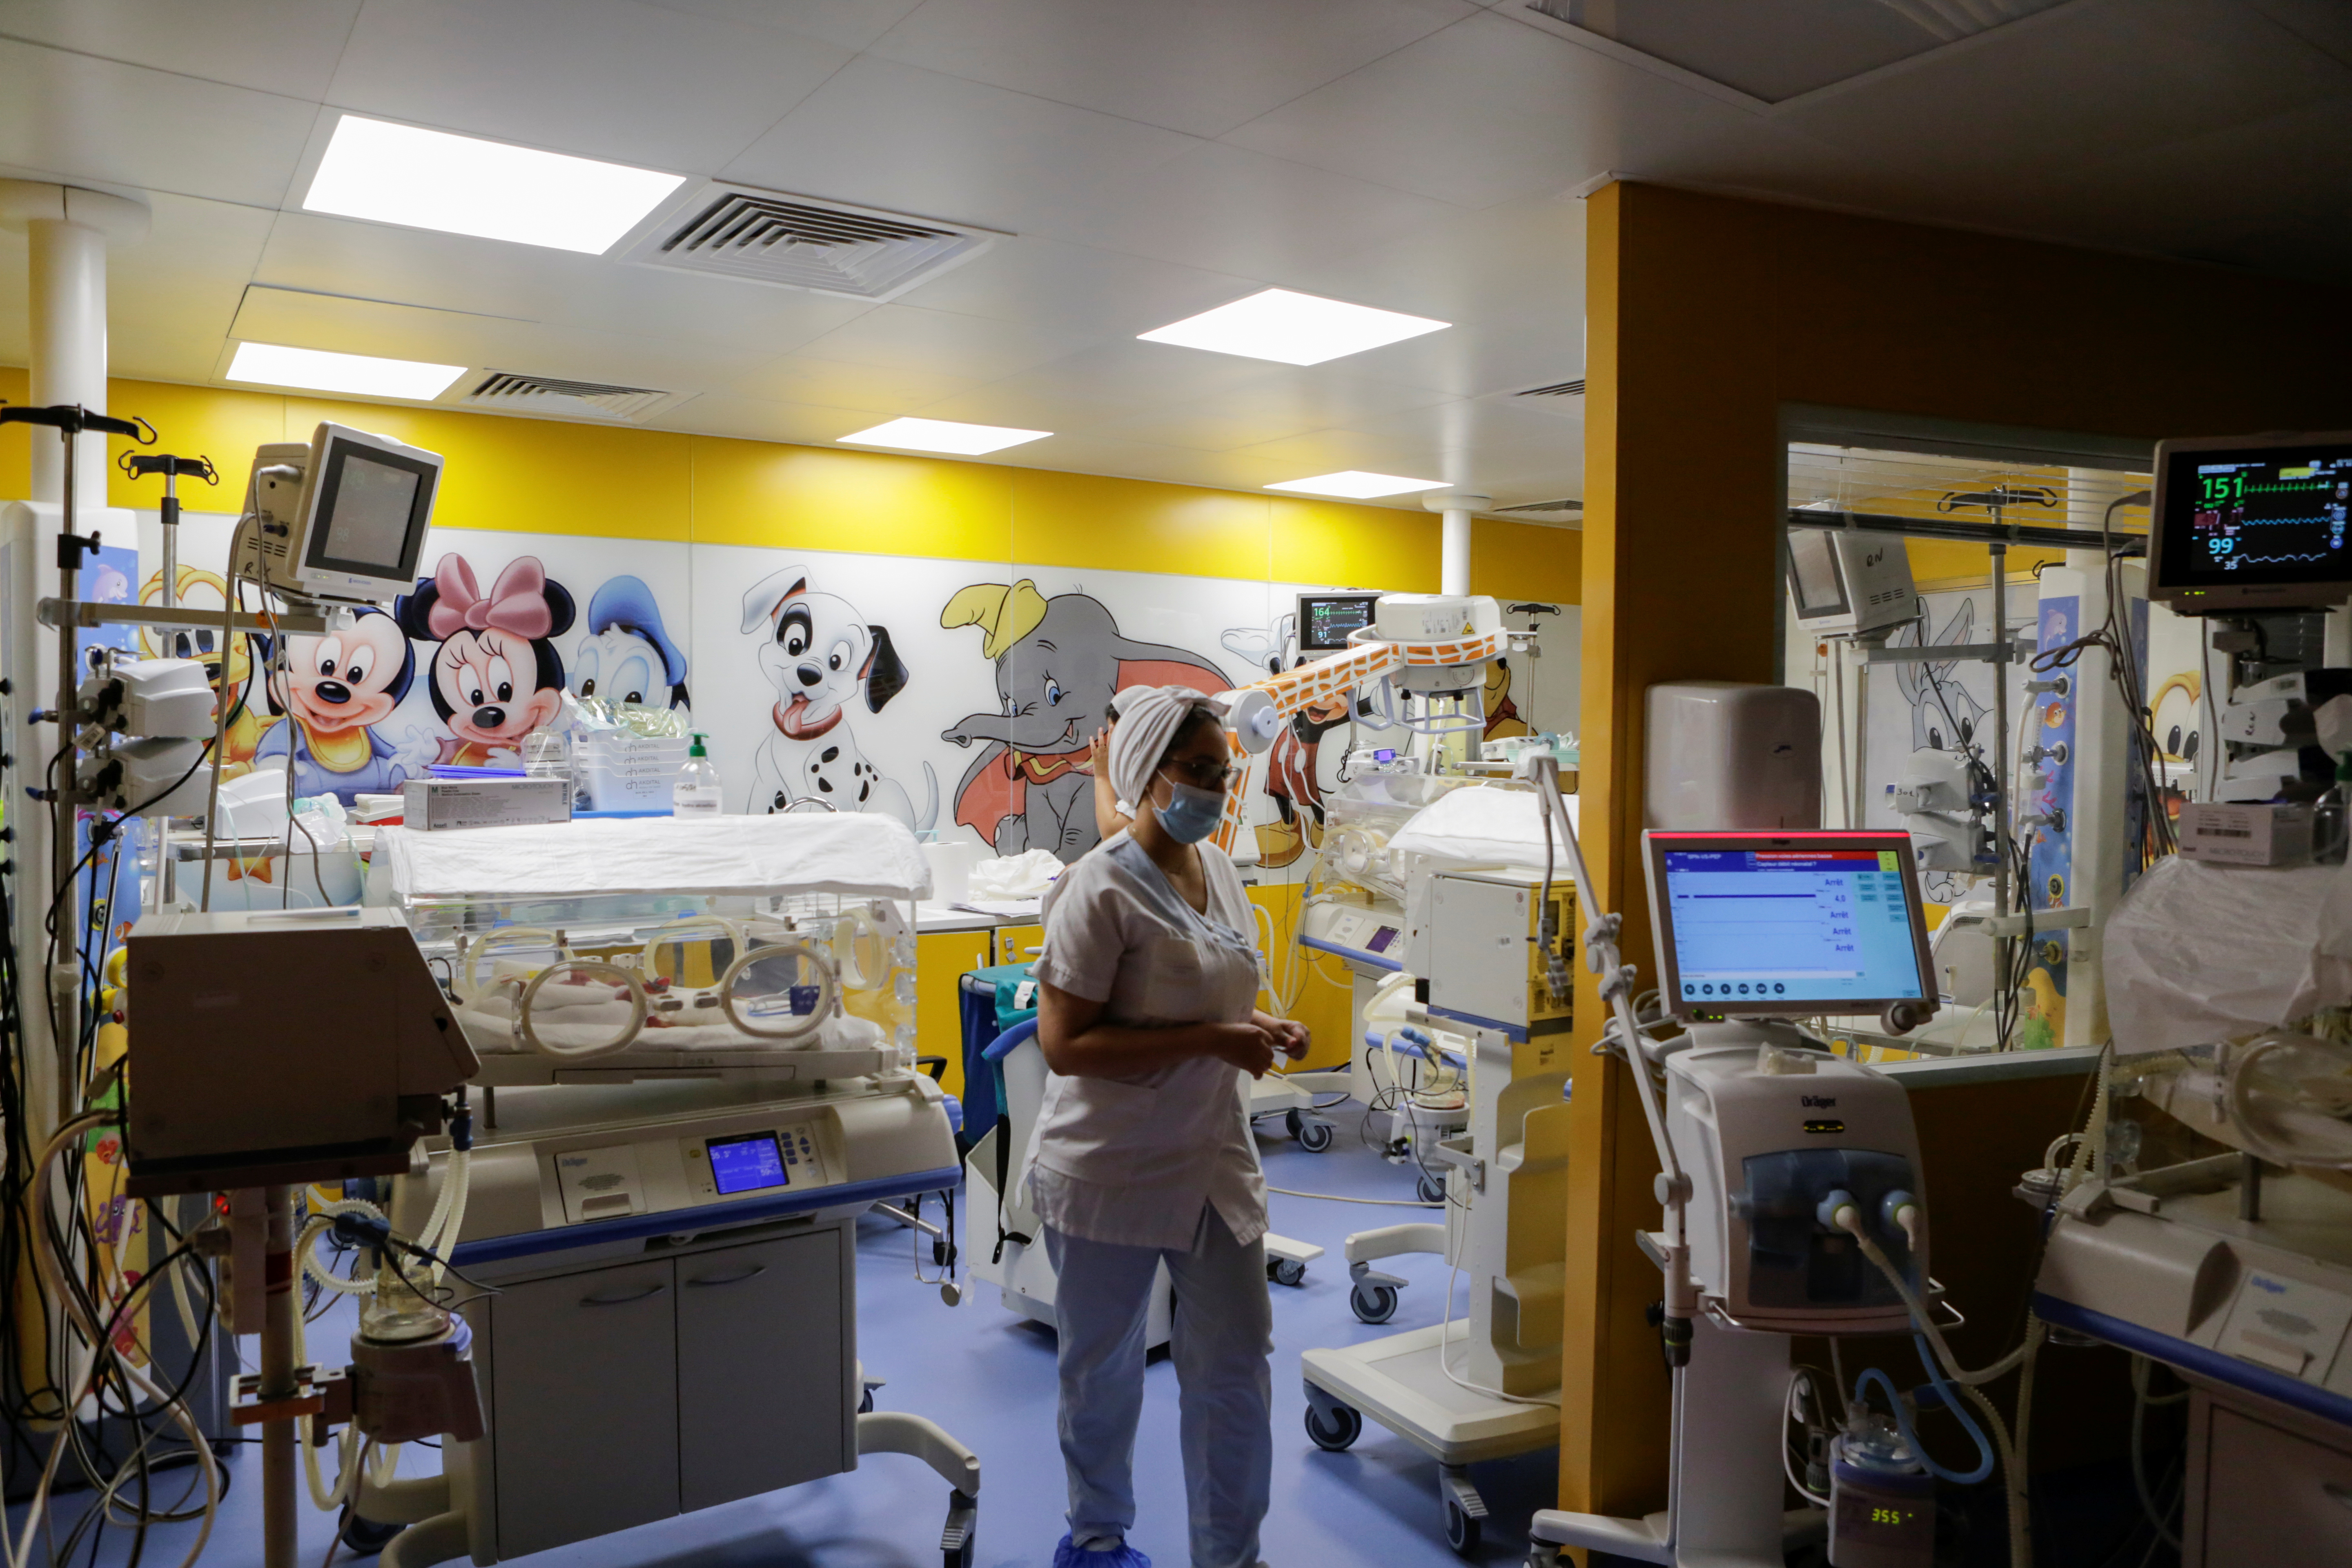 A nurse walks inside a maternity ward where the newborn nonuplets are, at the private clinic of Ain Borja in Casablanca, Morocco May 5, 2021. REUTERS/Youssef Boudlal